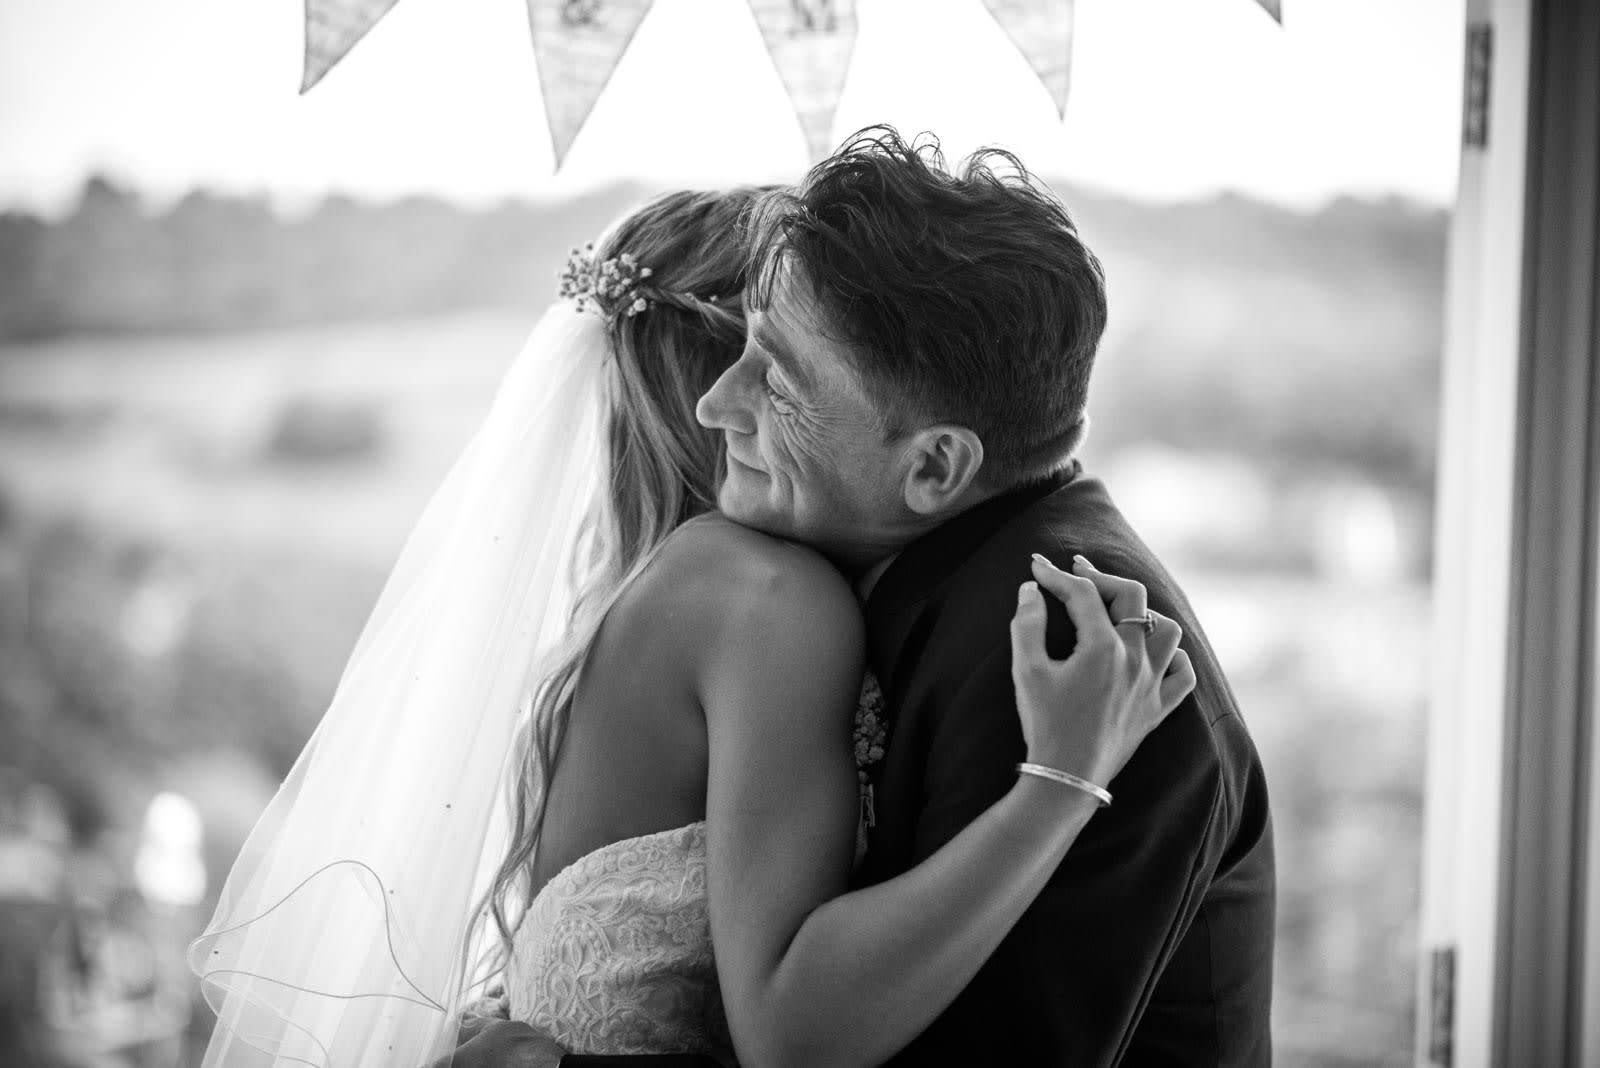 Real wedding of Alice and Brad in Bridgnorth, featured on Bridebook.co.uk.  Photo by: Nick Brightman Photography